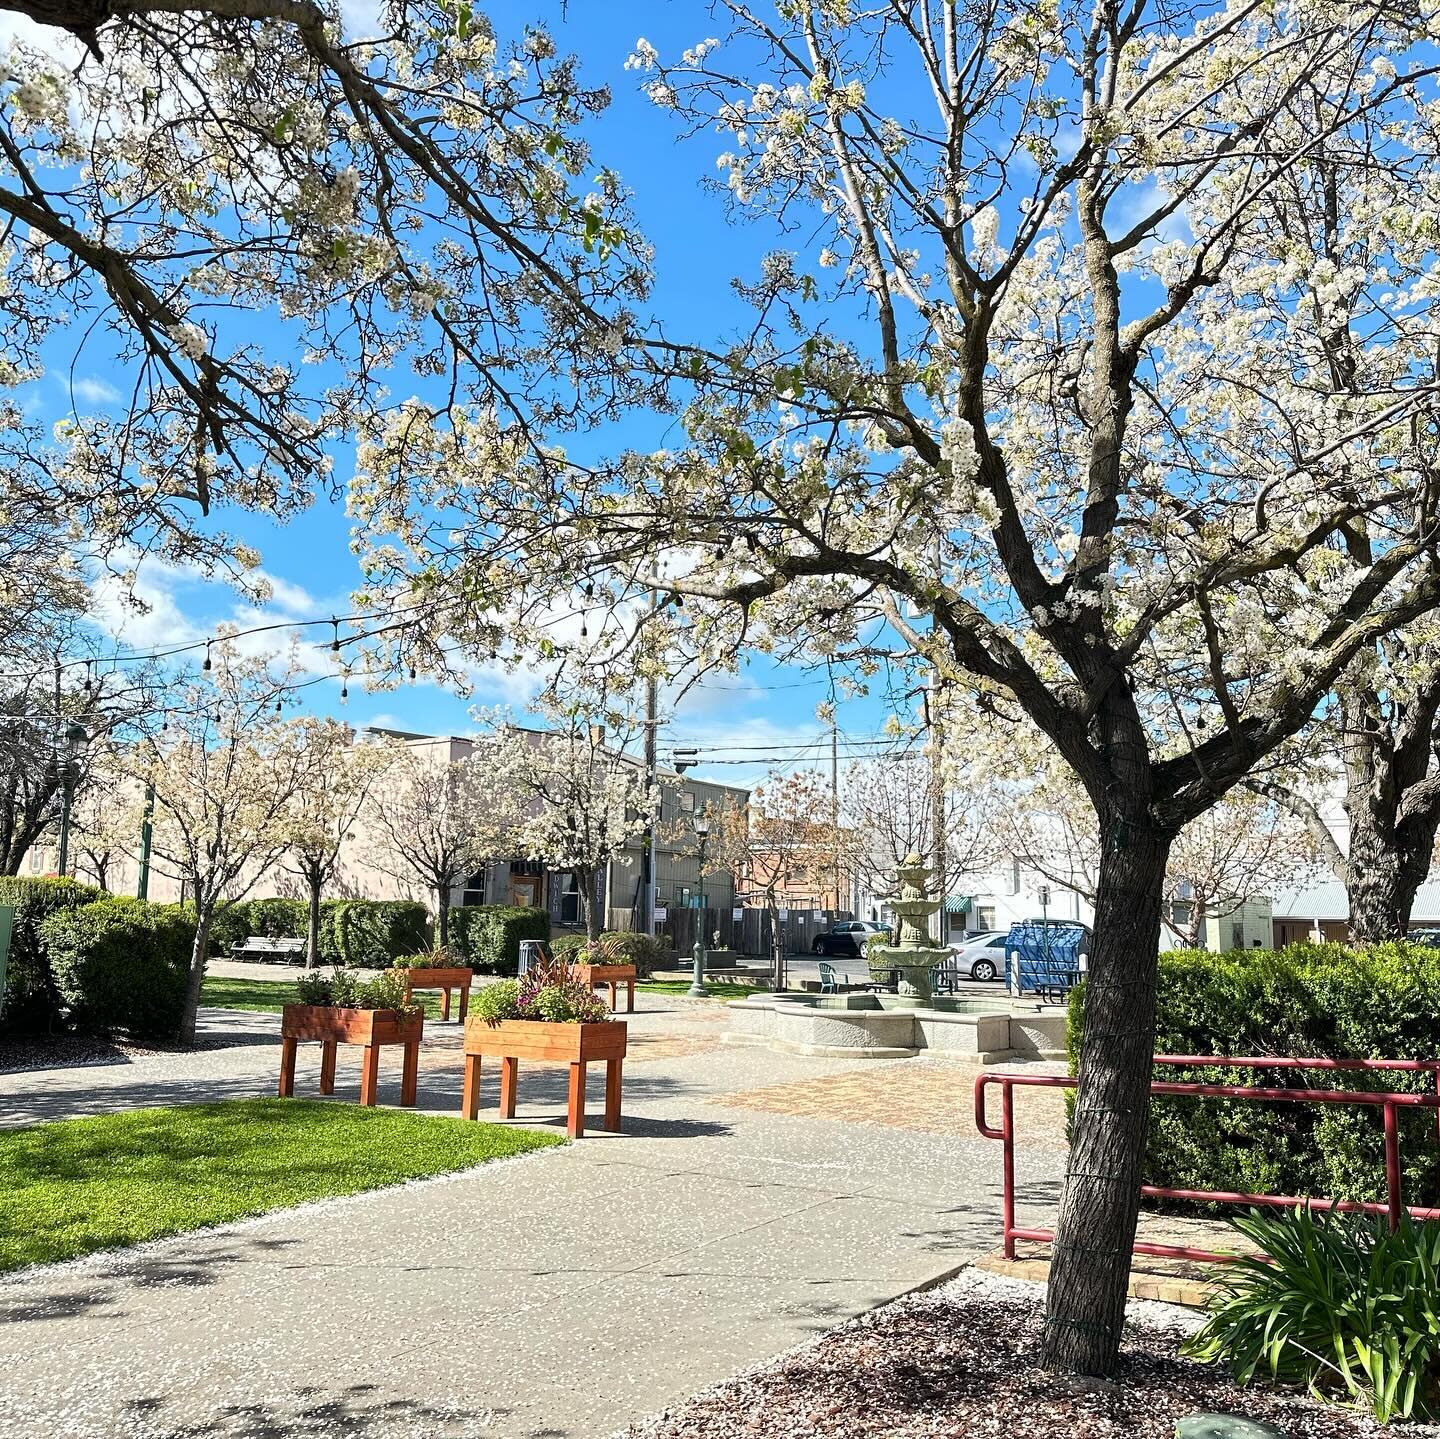 Things are blossoming in downtown Lincoln! 🌸☀️🍃 

#spring #downtownlincolnca #lincolnca #lovelincolnca #shopsmall #supportlocal